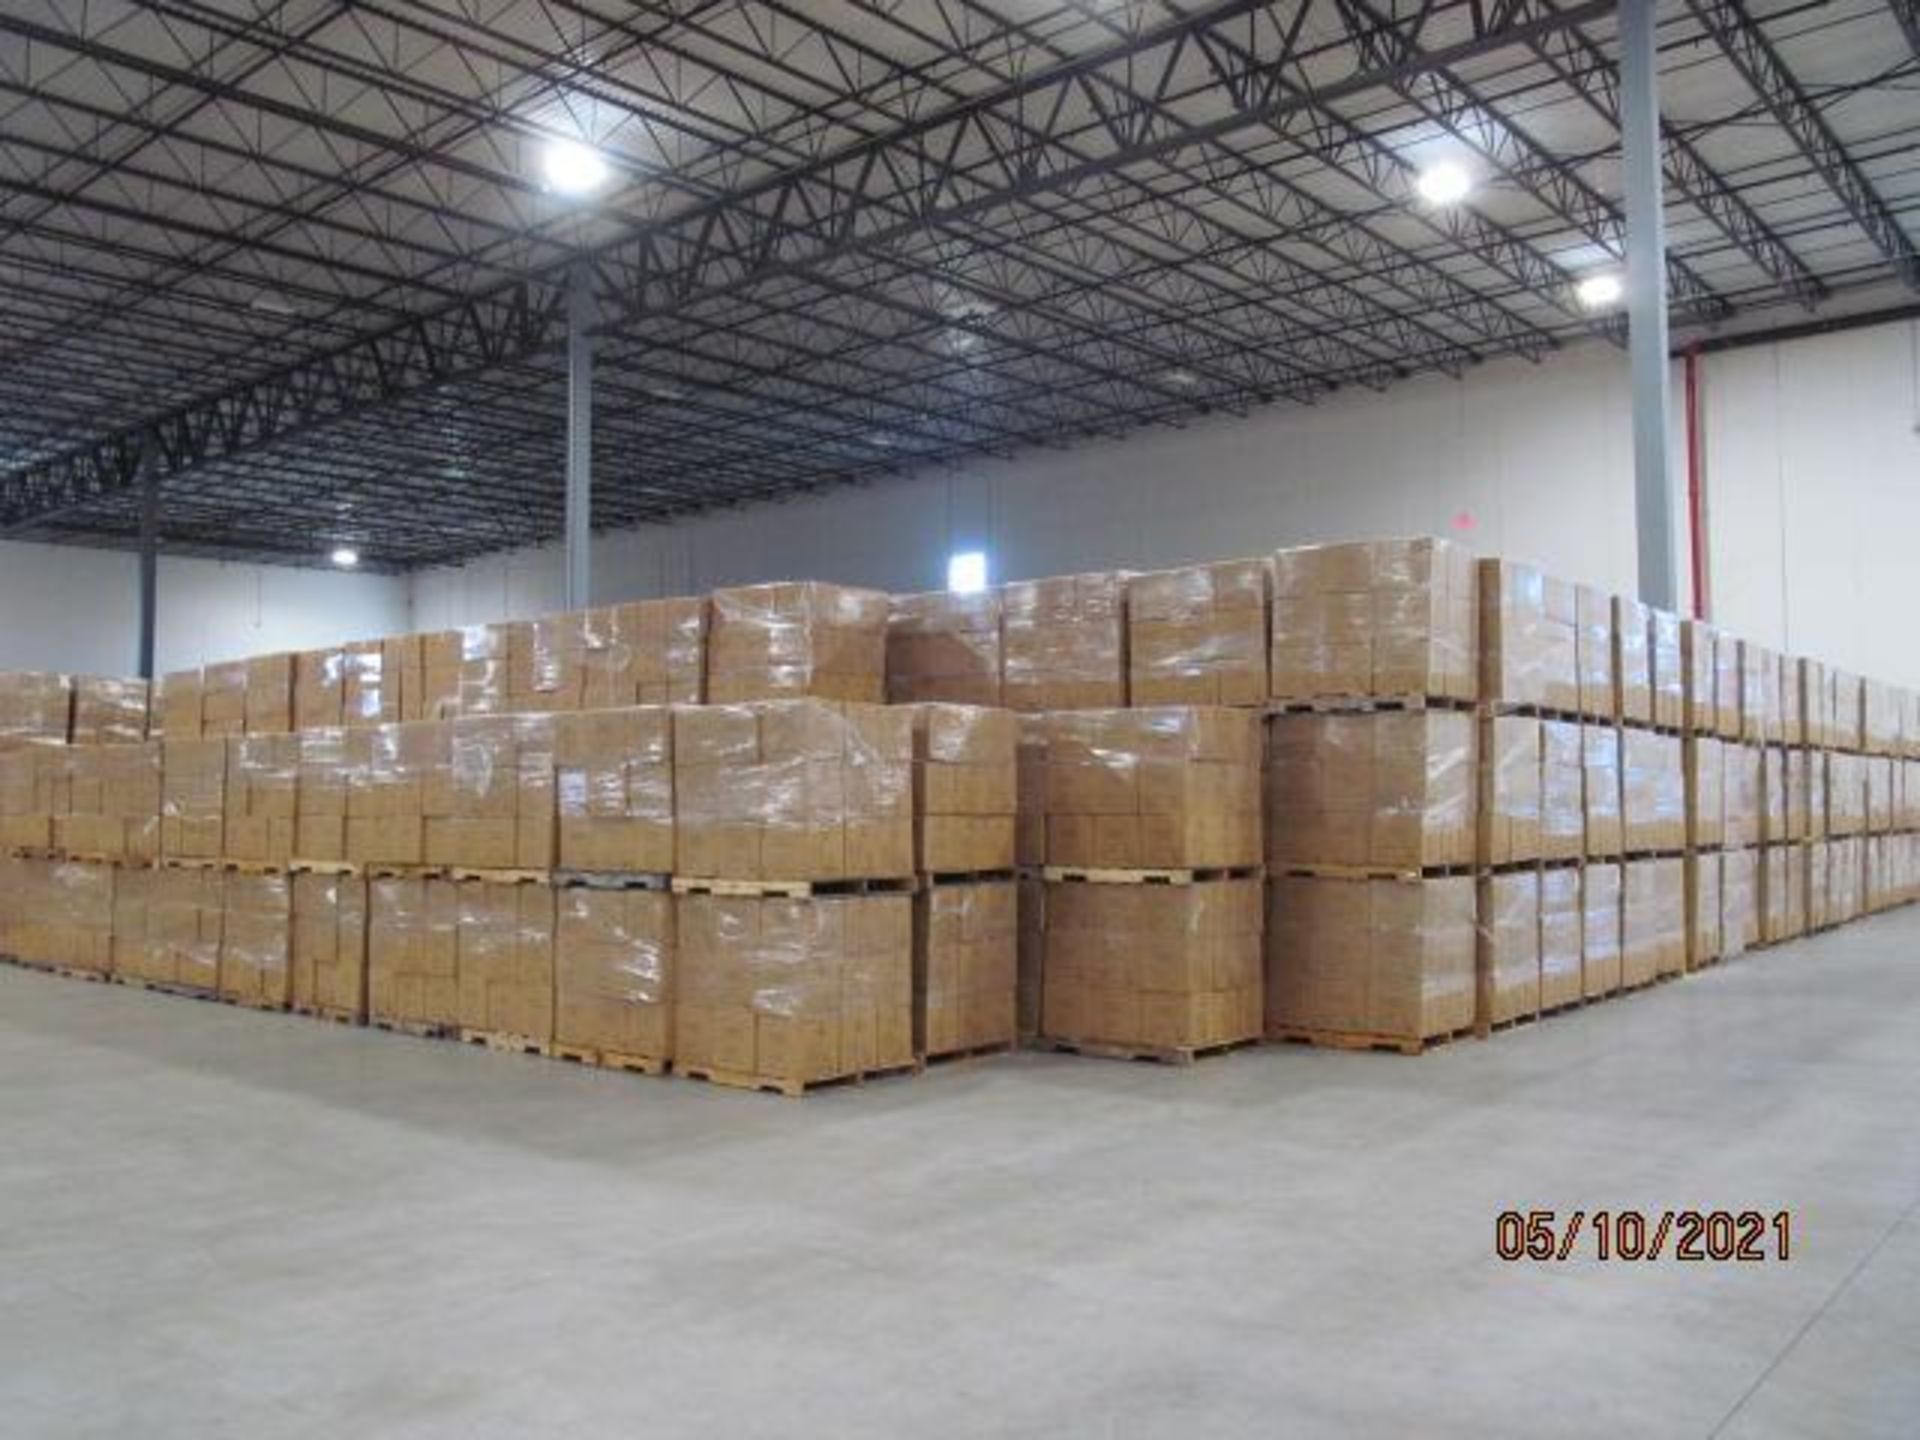 Lot of Waxman Kleen Freak Sanitizing Wipes consisting of 366,768 packages on 566 pallets. Each packa - Image 11 of 11